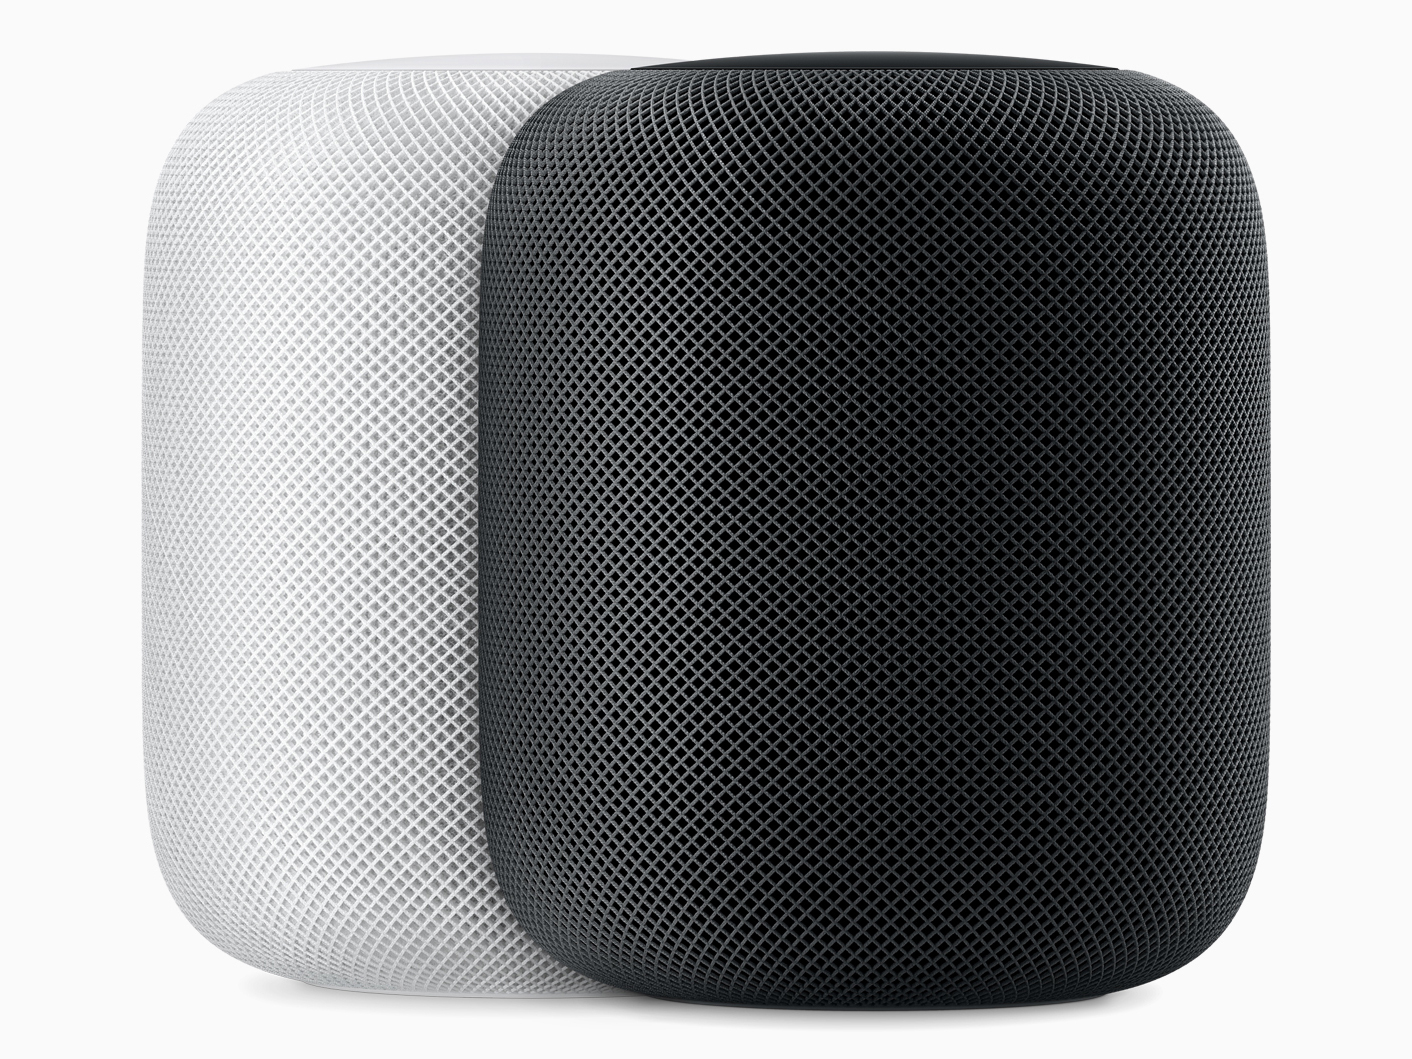 3) You can now go stereo with HomePod